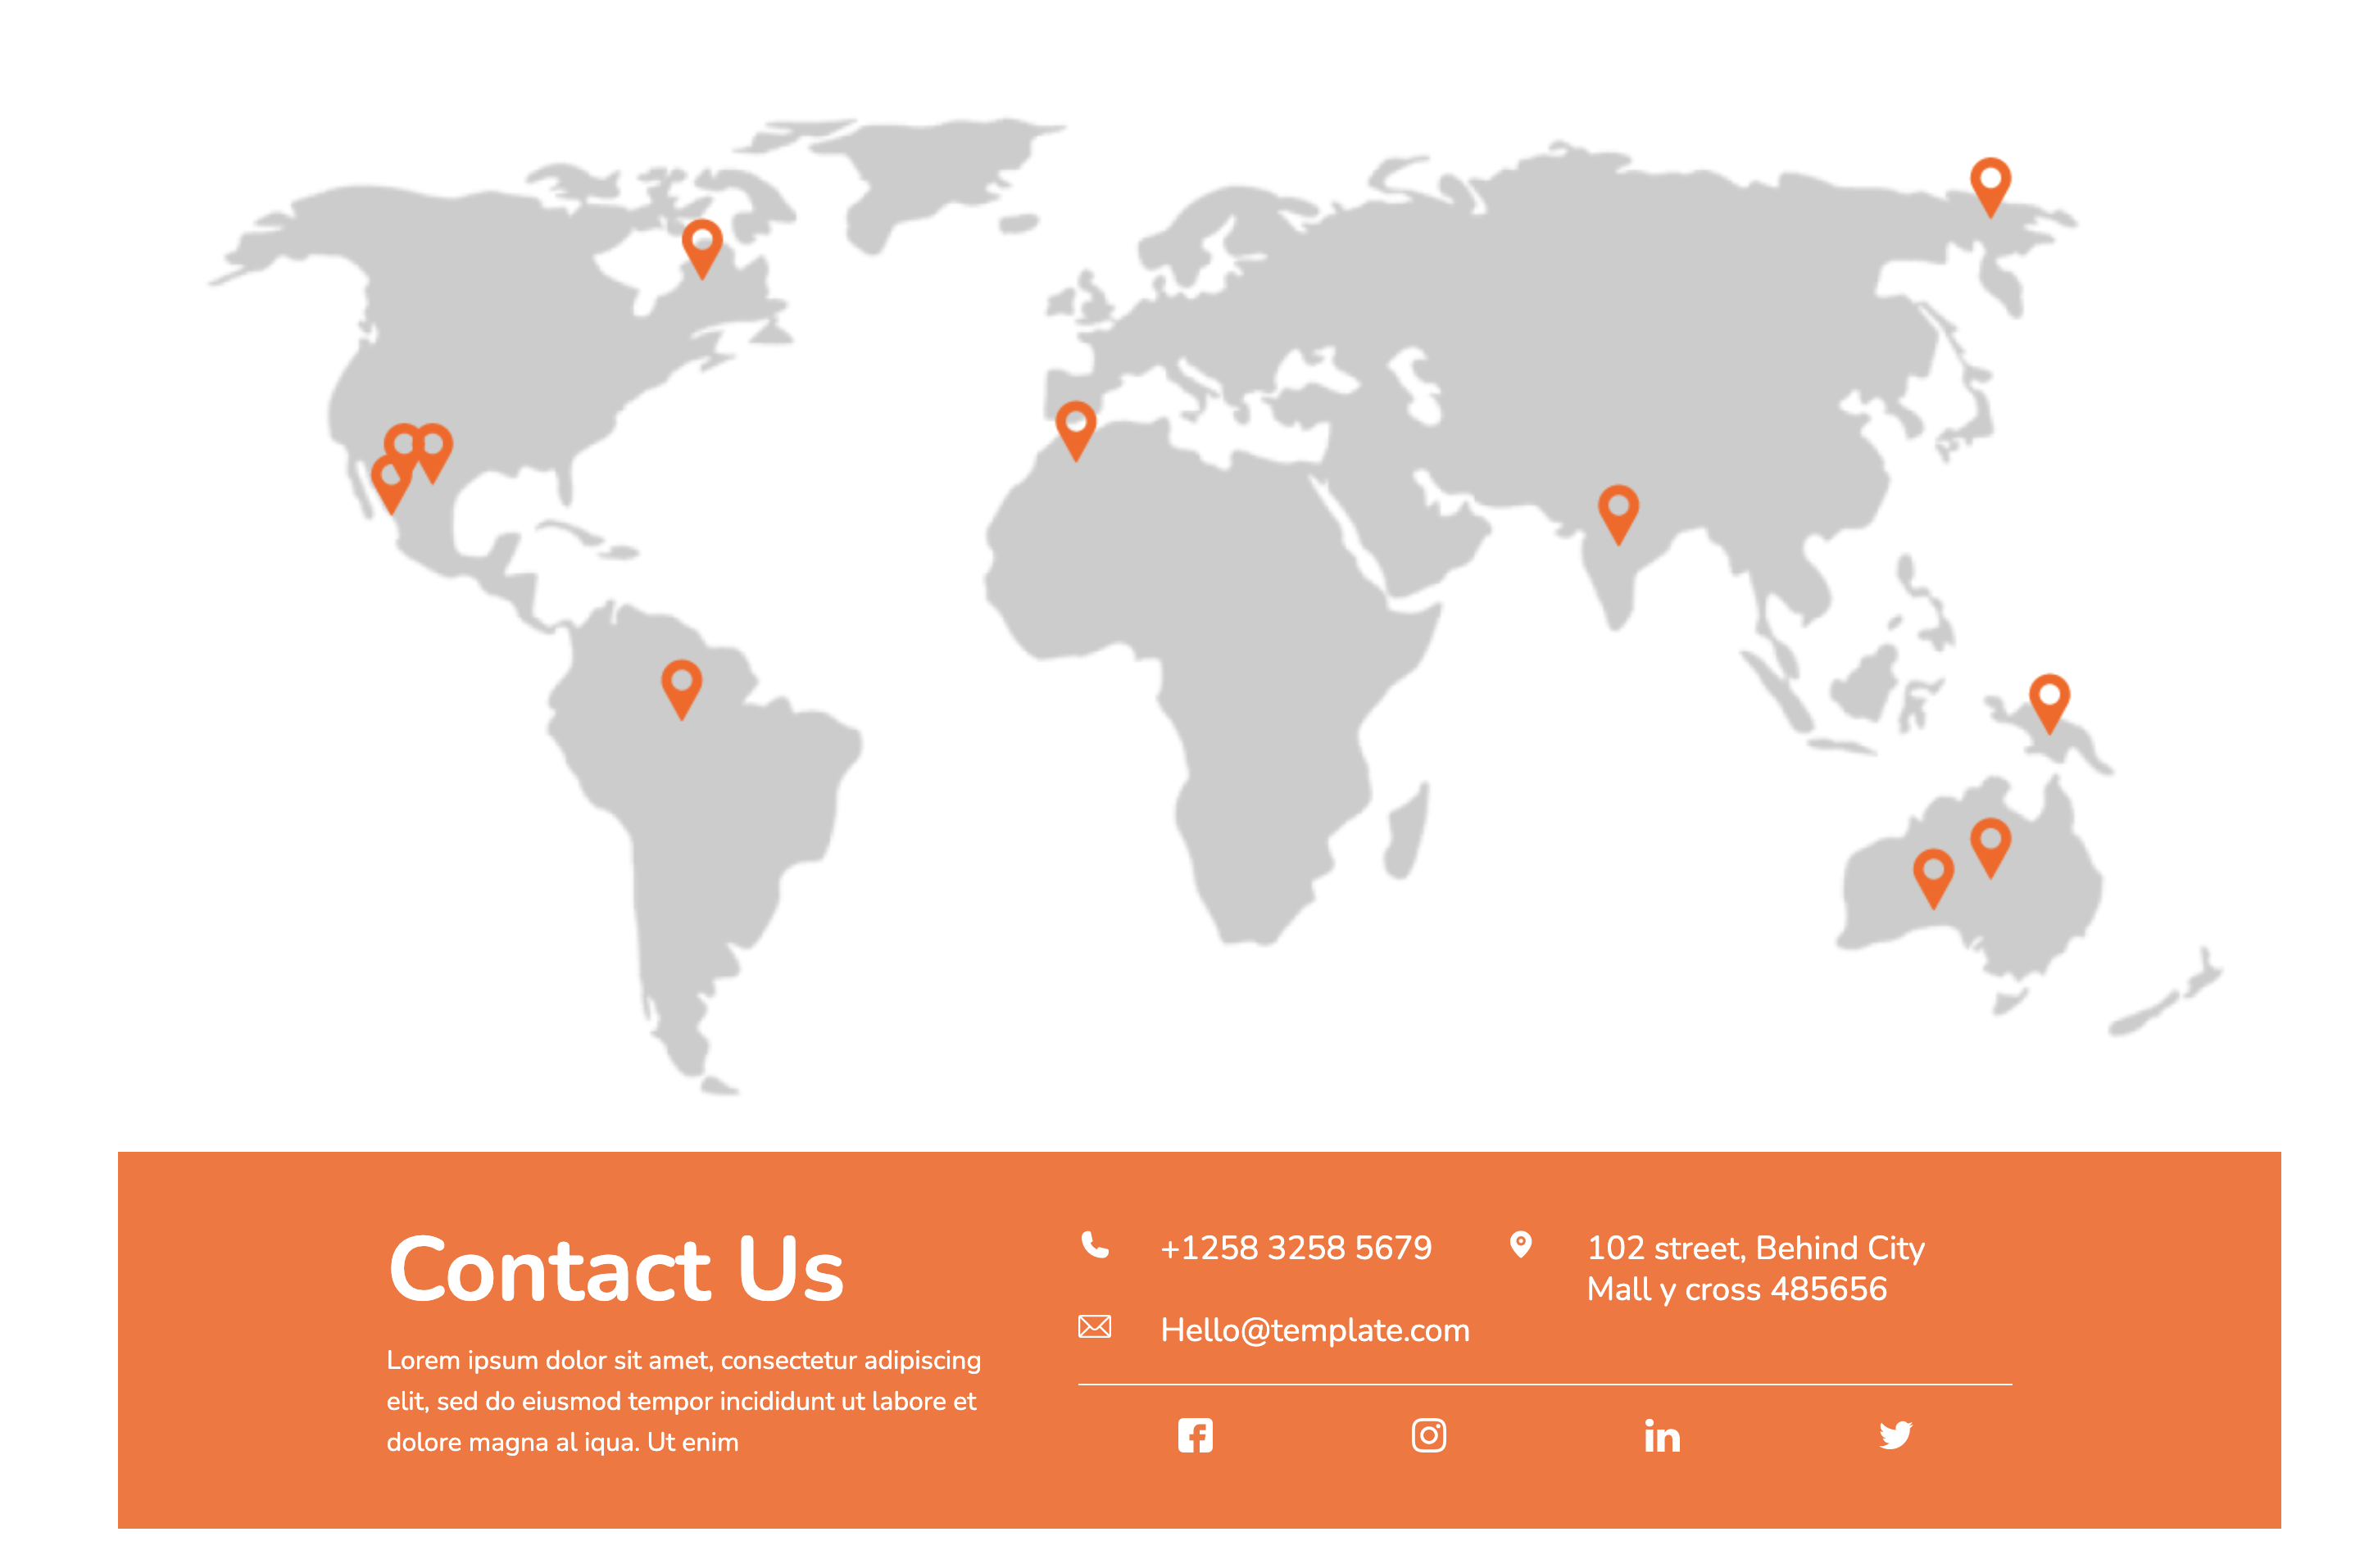 Contact designs for websites: Contact Page With World Map Desktop